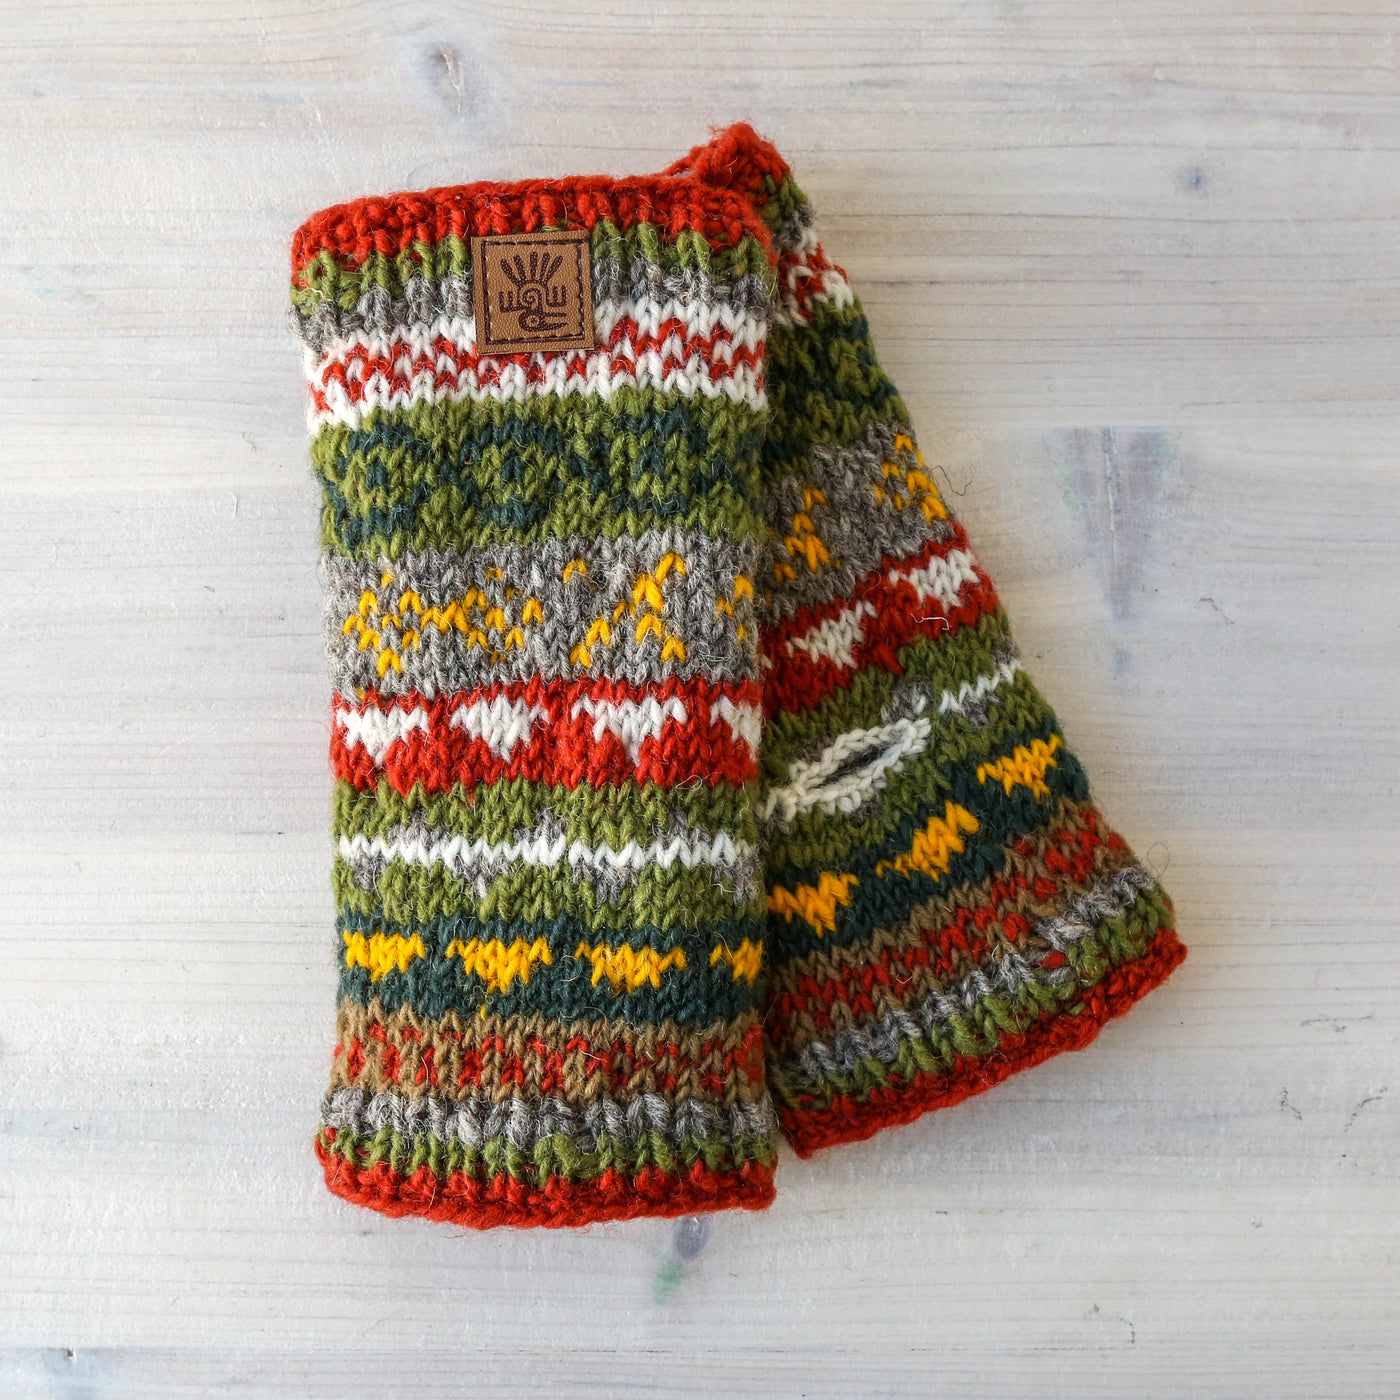 Finisterre Knitted Hand Warmers